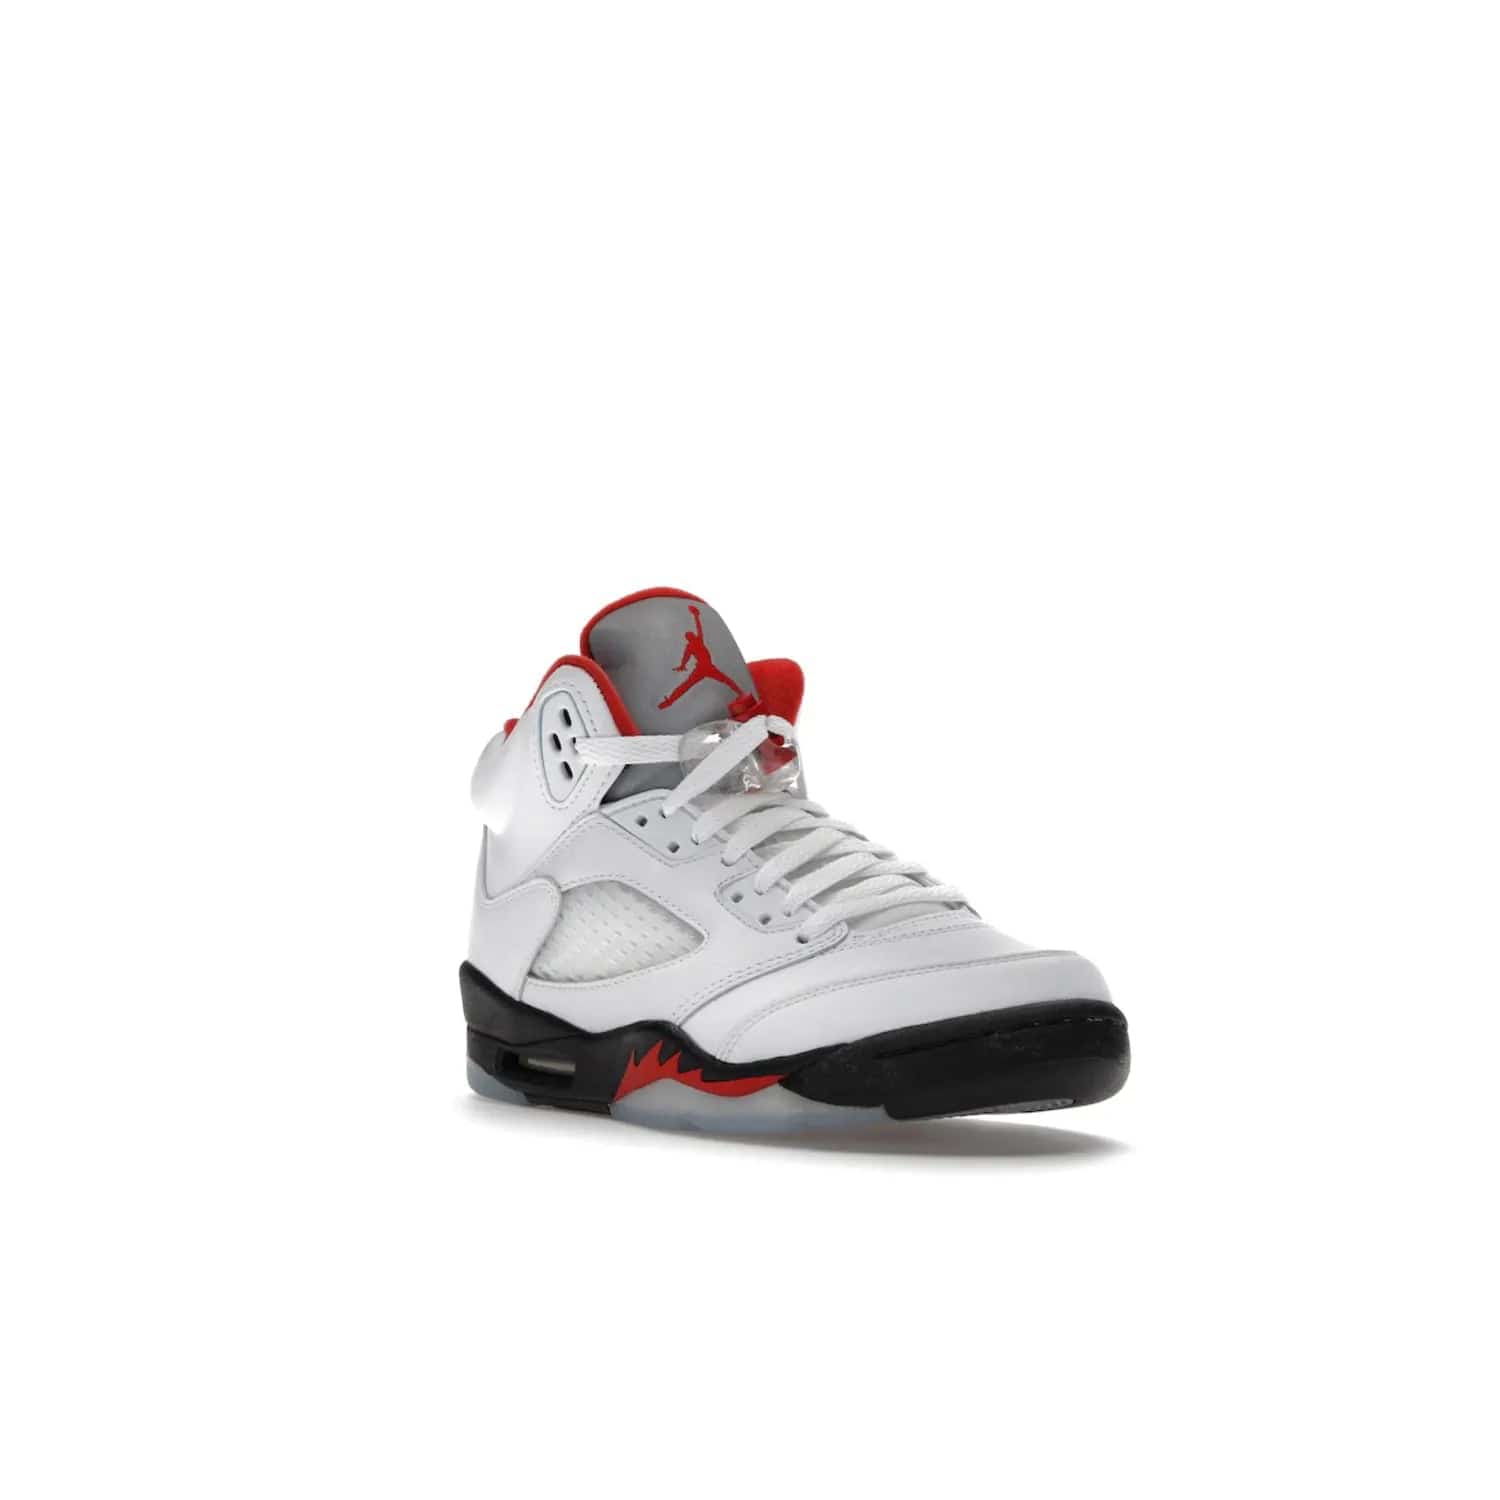 Jordan 5 Retro Fire Red Silver Tongue (2020) (GS) - Image 6 - Only at www.BallersClubKickz.com - A stylish option for any grade schooler. The Air Jordan 5 Retro Fire Red Silver Tongue 2020 GS features a combination of four hues, premium white leather, a clear mesh mid-upper and a reflective silver tongue. An icy translucent blue outsole completes the look. Available on May 2, $150.